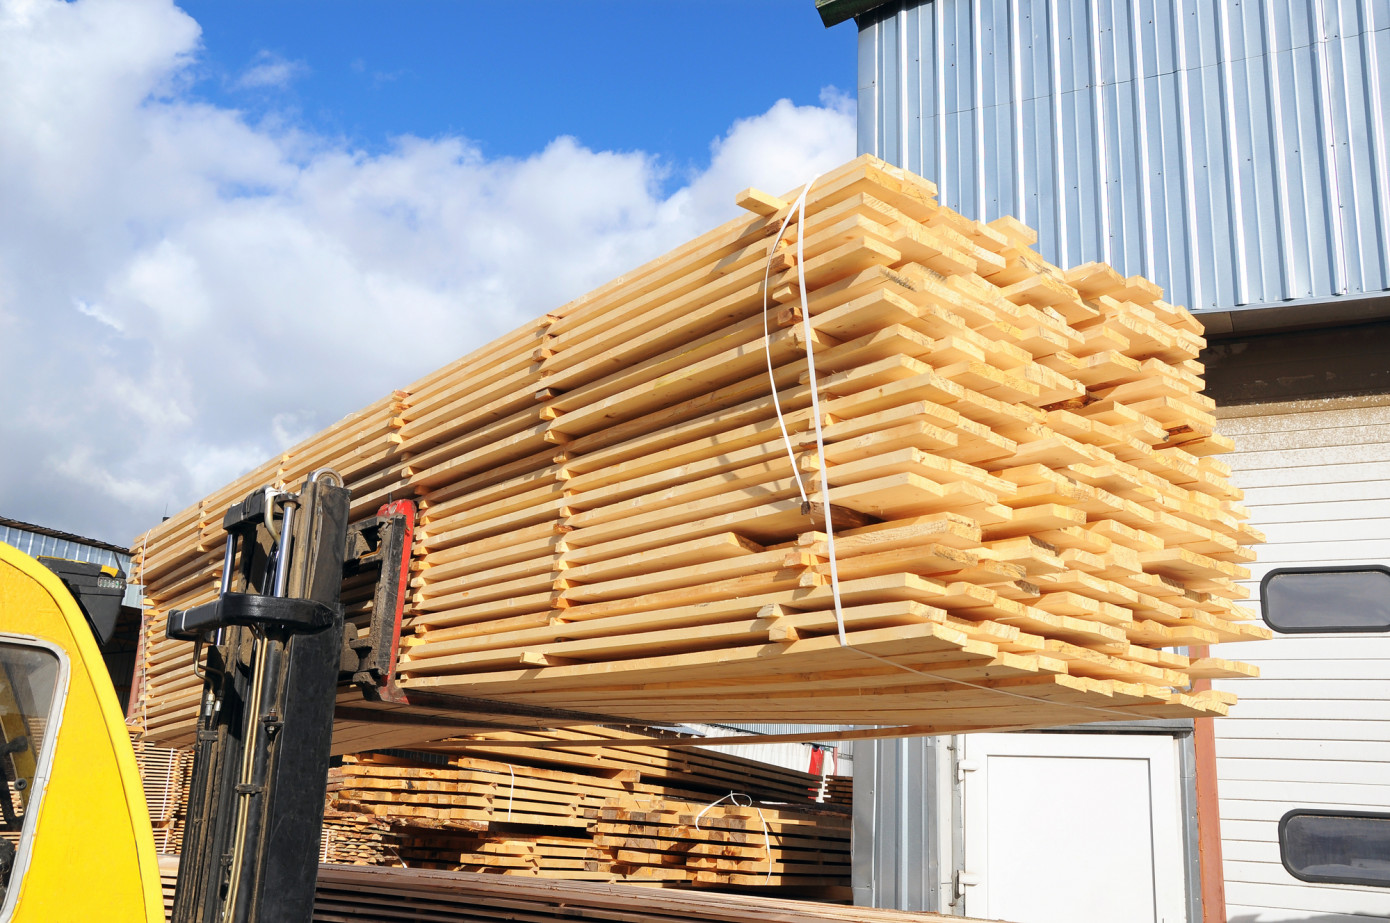 Exports of lumber from Thailand to China increase 33% in March